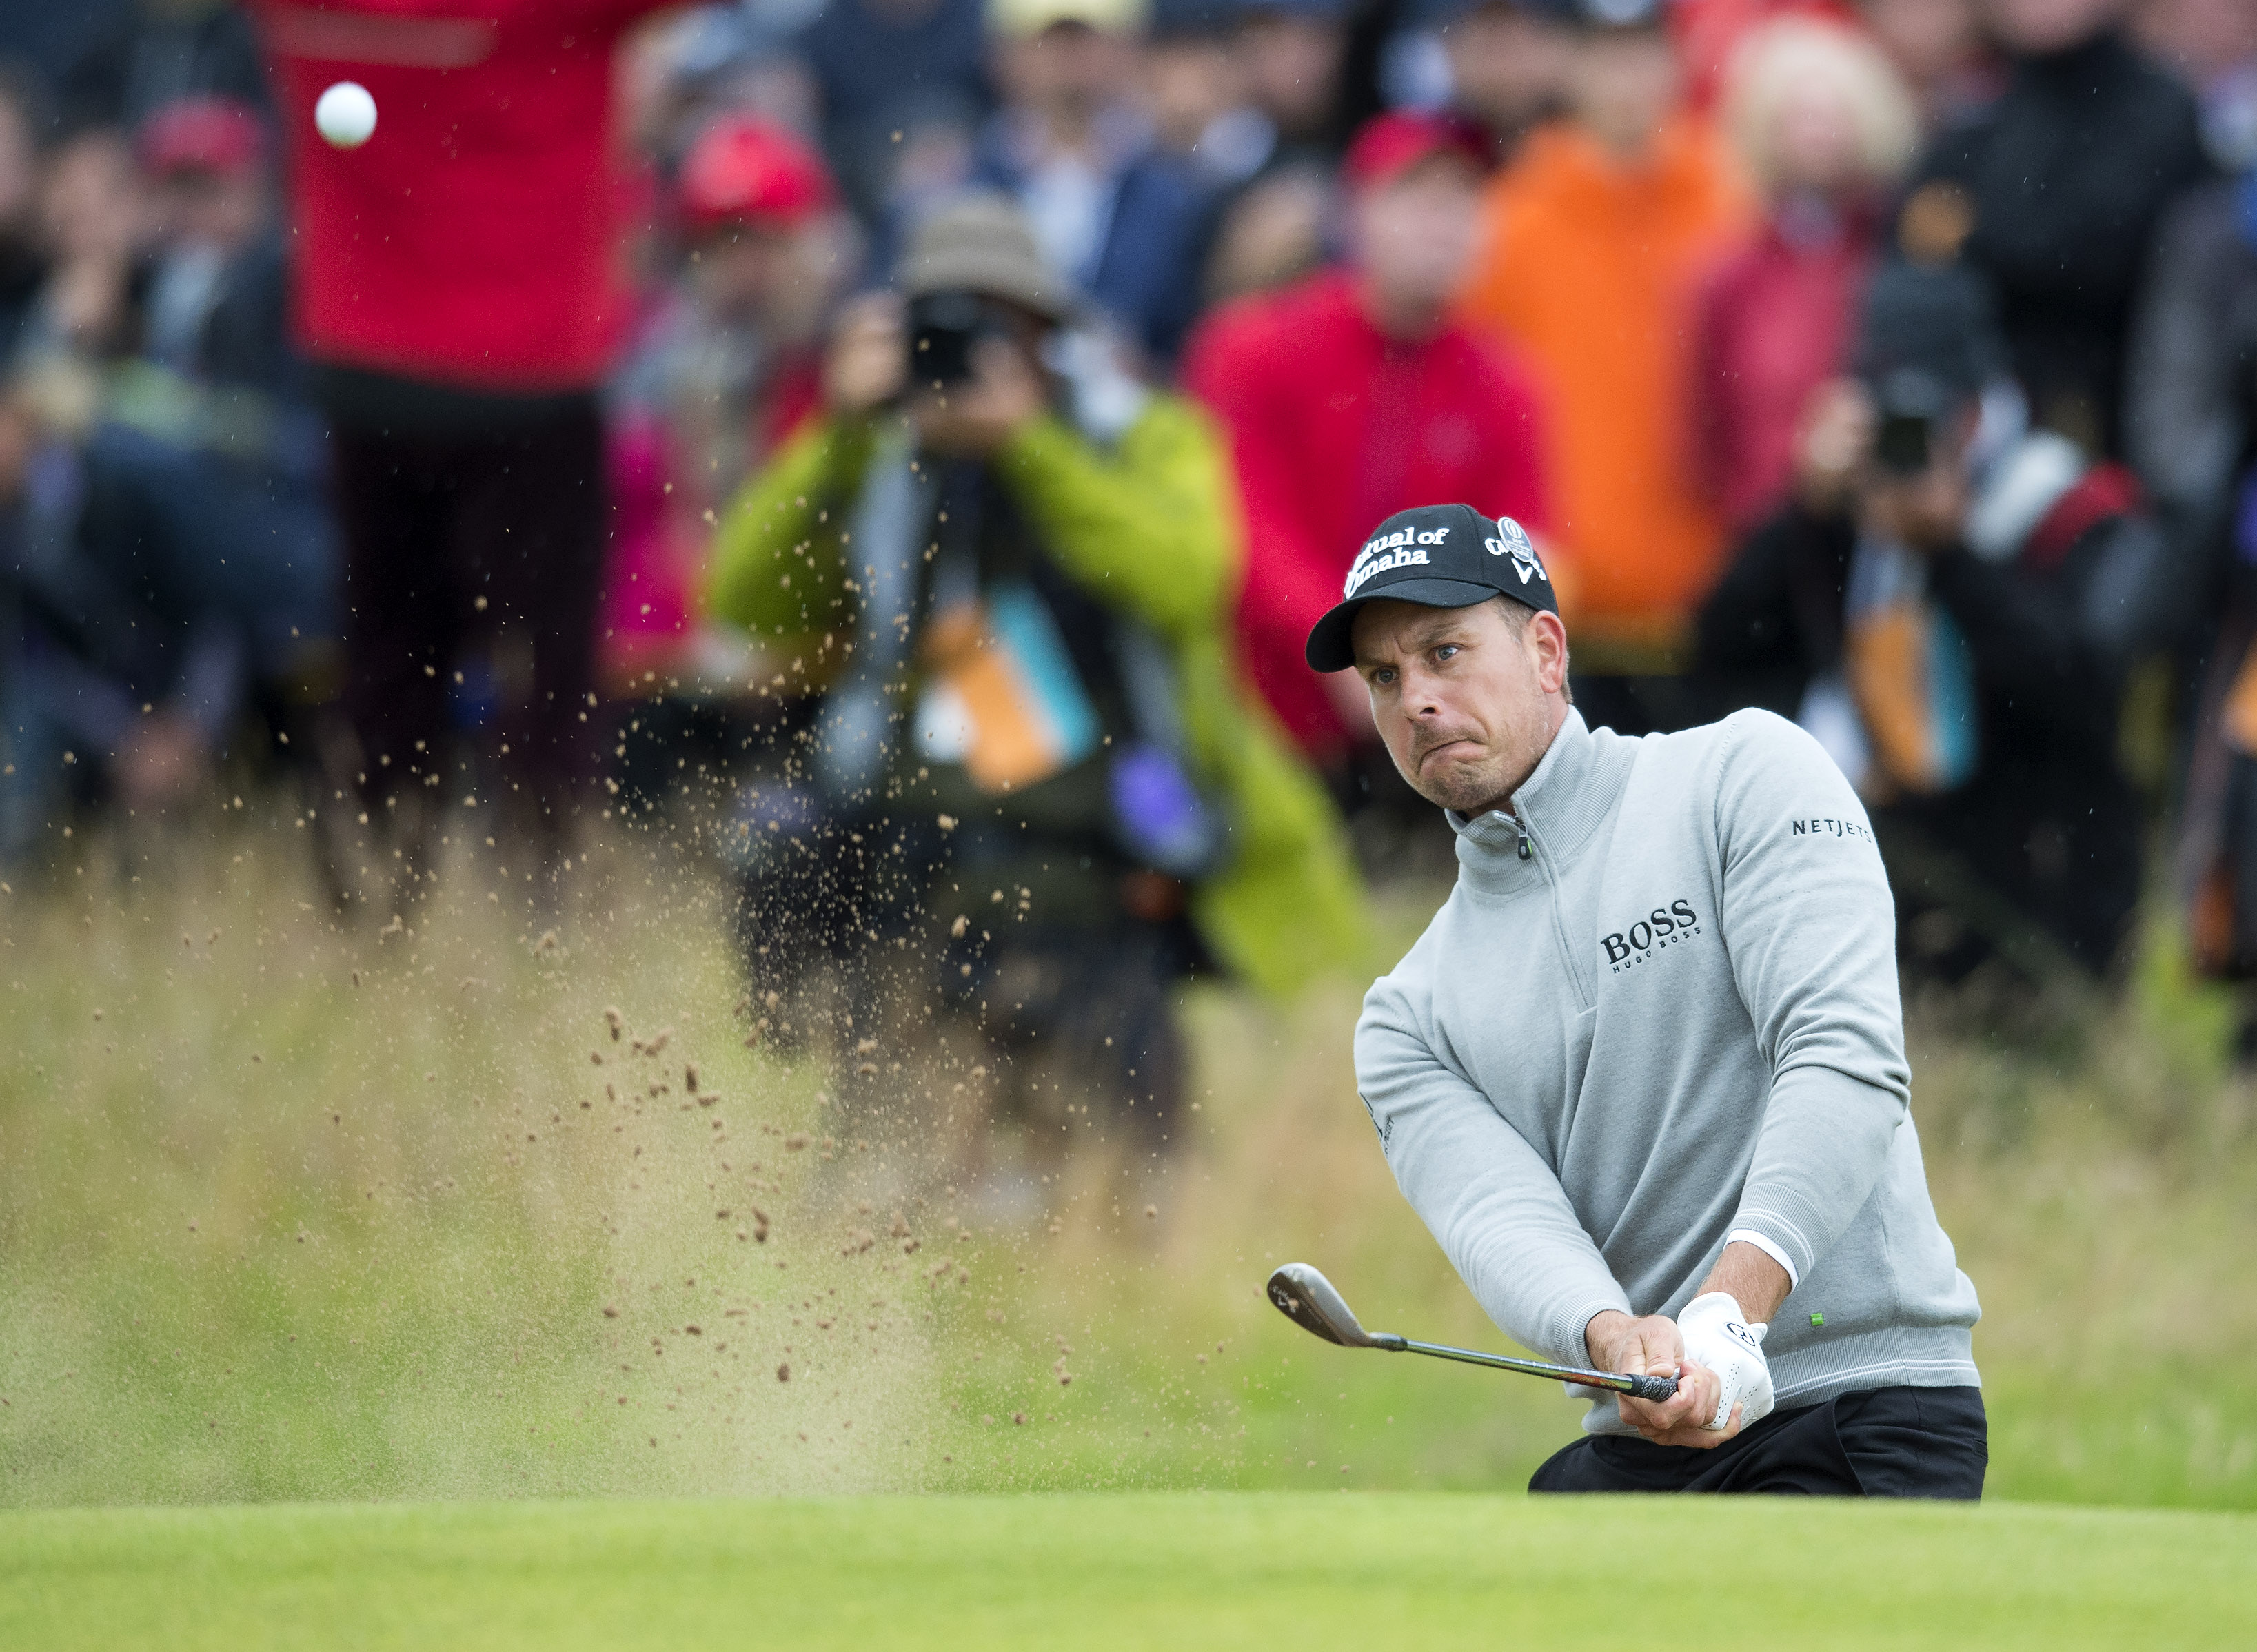 Henrik Stenson rises up the leaderboard at The Open